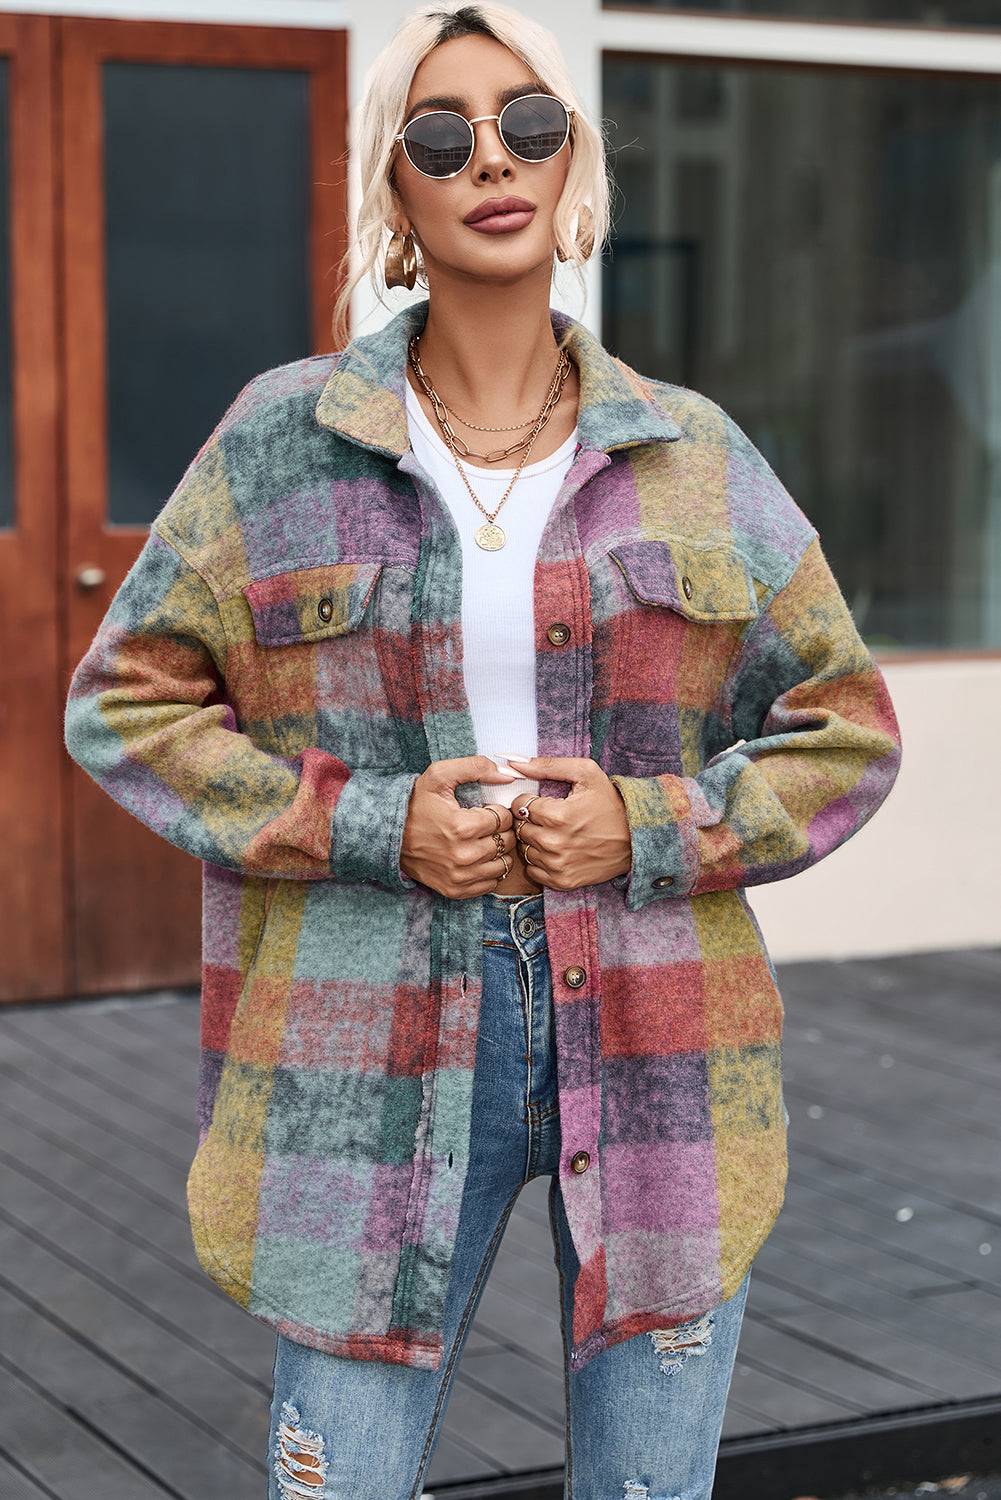 a woman wearing a multicolored jacket and ripped jeans